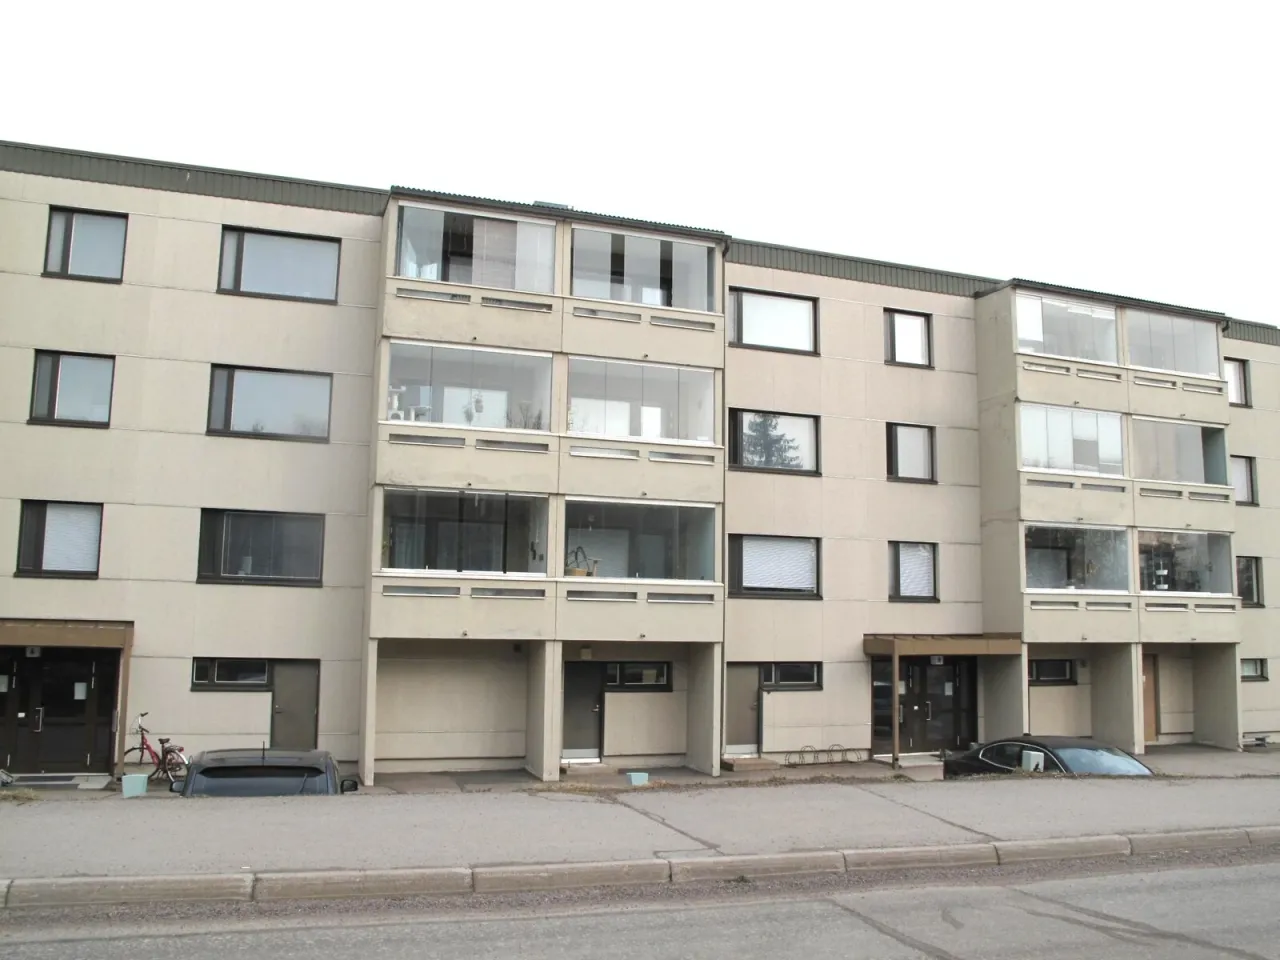 Flat in Kotka, Finland, 61.5 sq.m - picture 1